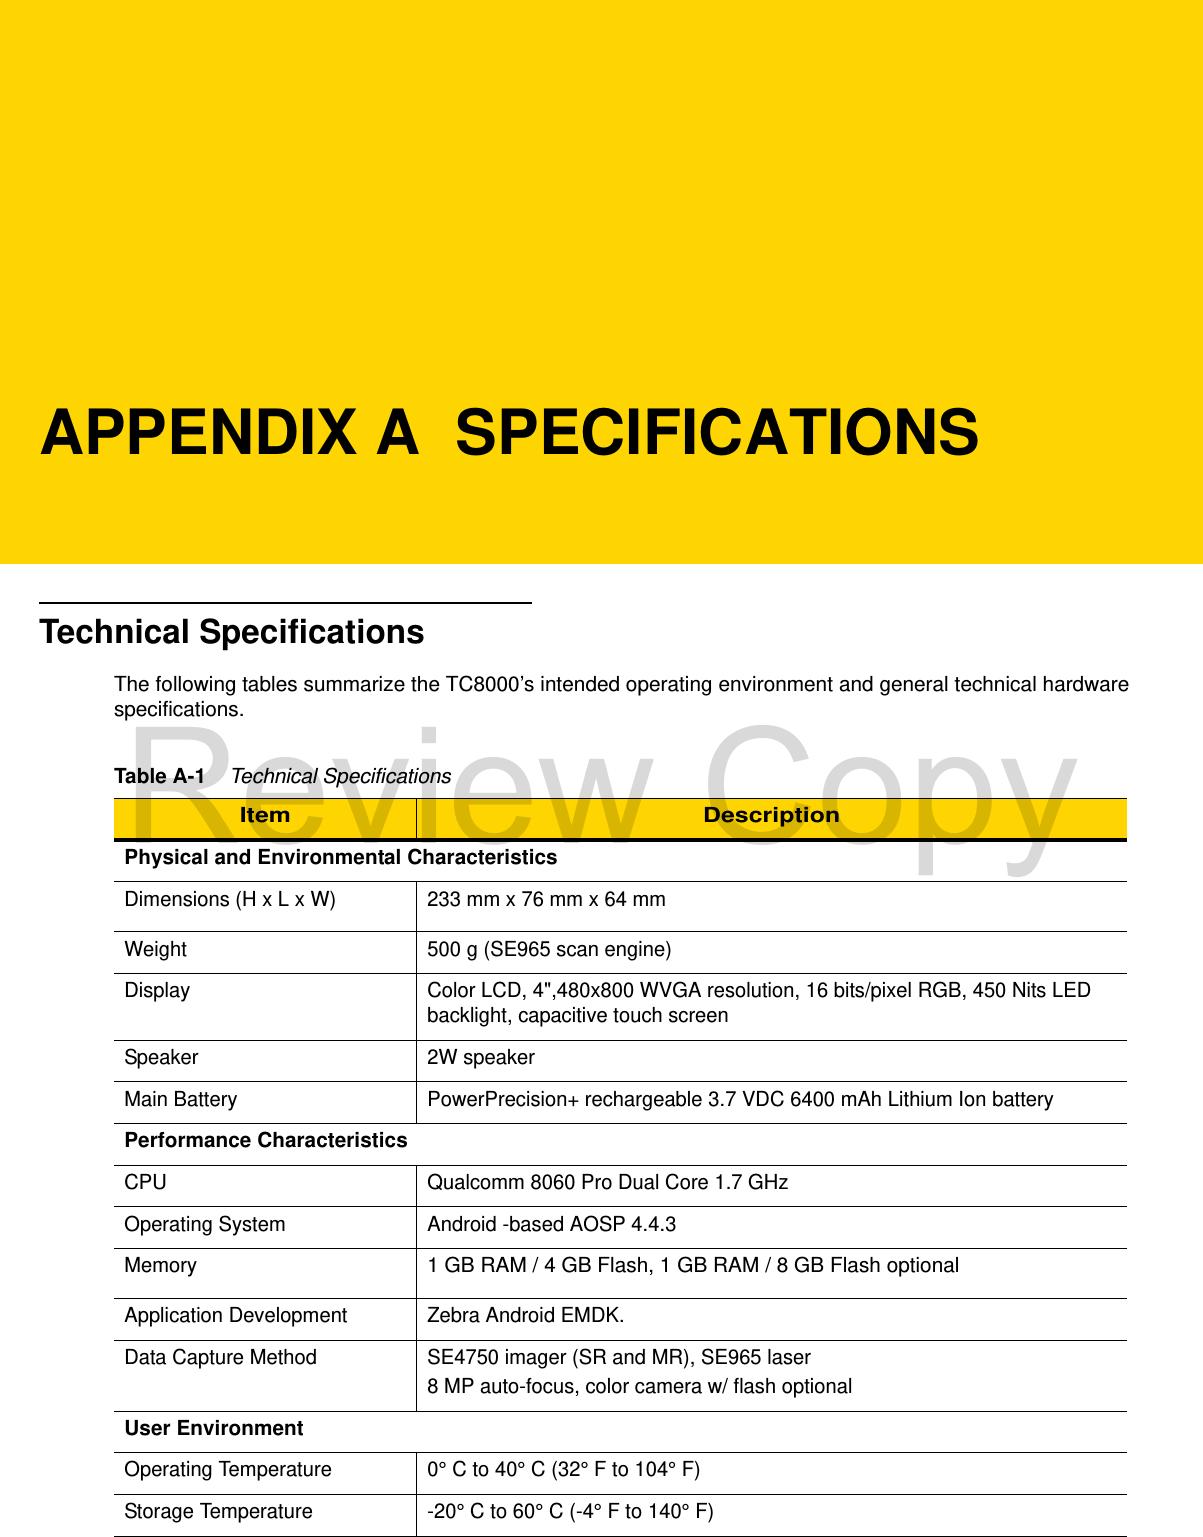 APPENDIX A  SPECIFICATIONSTechnical SpecificationsThe following tables summarize the TC8000’s intended operating environment and general technical hardware specifications.Table A-1    Technical SpecificationsItem DescriptionPhysical and Environmental CharacteristicsDimensions (H x L x W) 233 mm x 76 mm x 64 mmWeight 500 g (SE965 scan engine)Display Color LCD, 4&quot;,480x800 WVGA resolution, 16 bits/pixel RGB, 450 Nits LED backlight, capacitive touch screenSpeaker 2W speakerMain Battery PowerPrecision+ rechargeable 3.7 VDC 6400 mAh Lithium Ion battery Performance CharacteristicsCPU Qualcomm 8060 Pro Dual Core 1.7 GHzOperating System Android -based AOSP 4.4.3Memory1 GB RAM / 4 GB Flash, 1 GB RAM / 8 GB Flash optionalApplication Development Zebra Android EMDK.Data Capture Method SE4750 imager (SR and MR), SE965 laser8 MP auto-focus, color camera w/ flash optionalUser EnvironmentOperating Temperature 0° C to 40° C (32° F to 104° F)Storage Temperature -20° C to 60° C (-4° F to 140° F)Review Copy